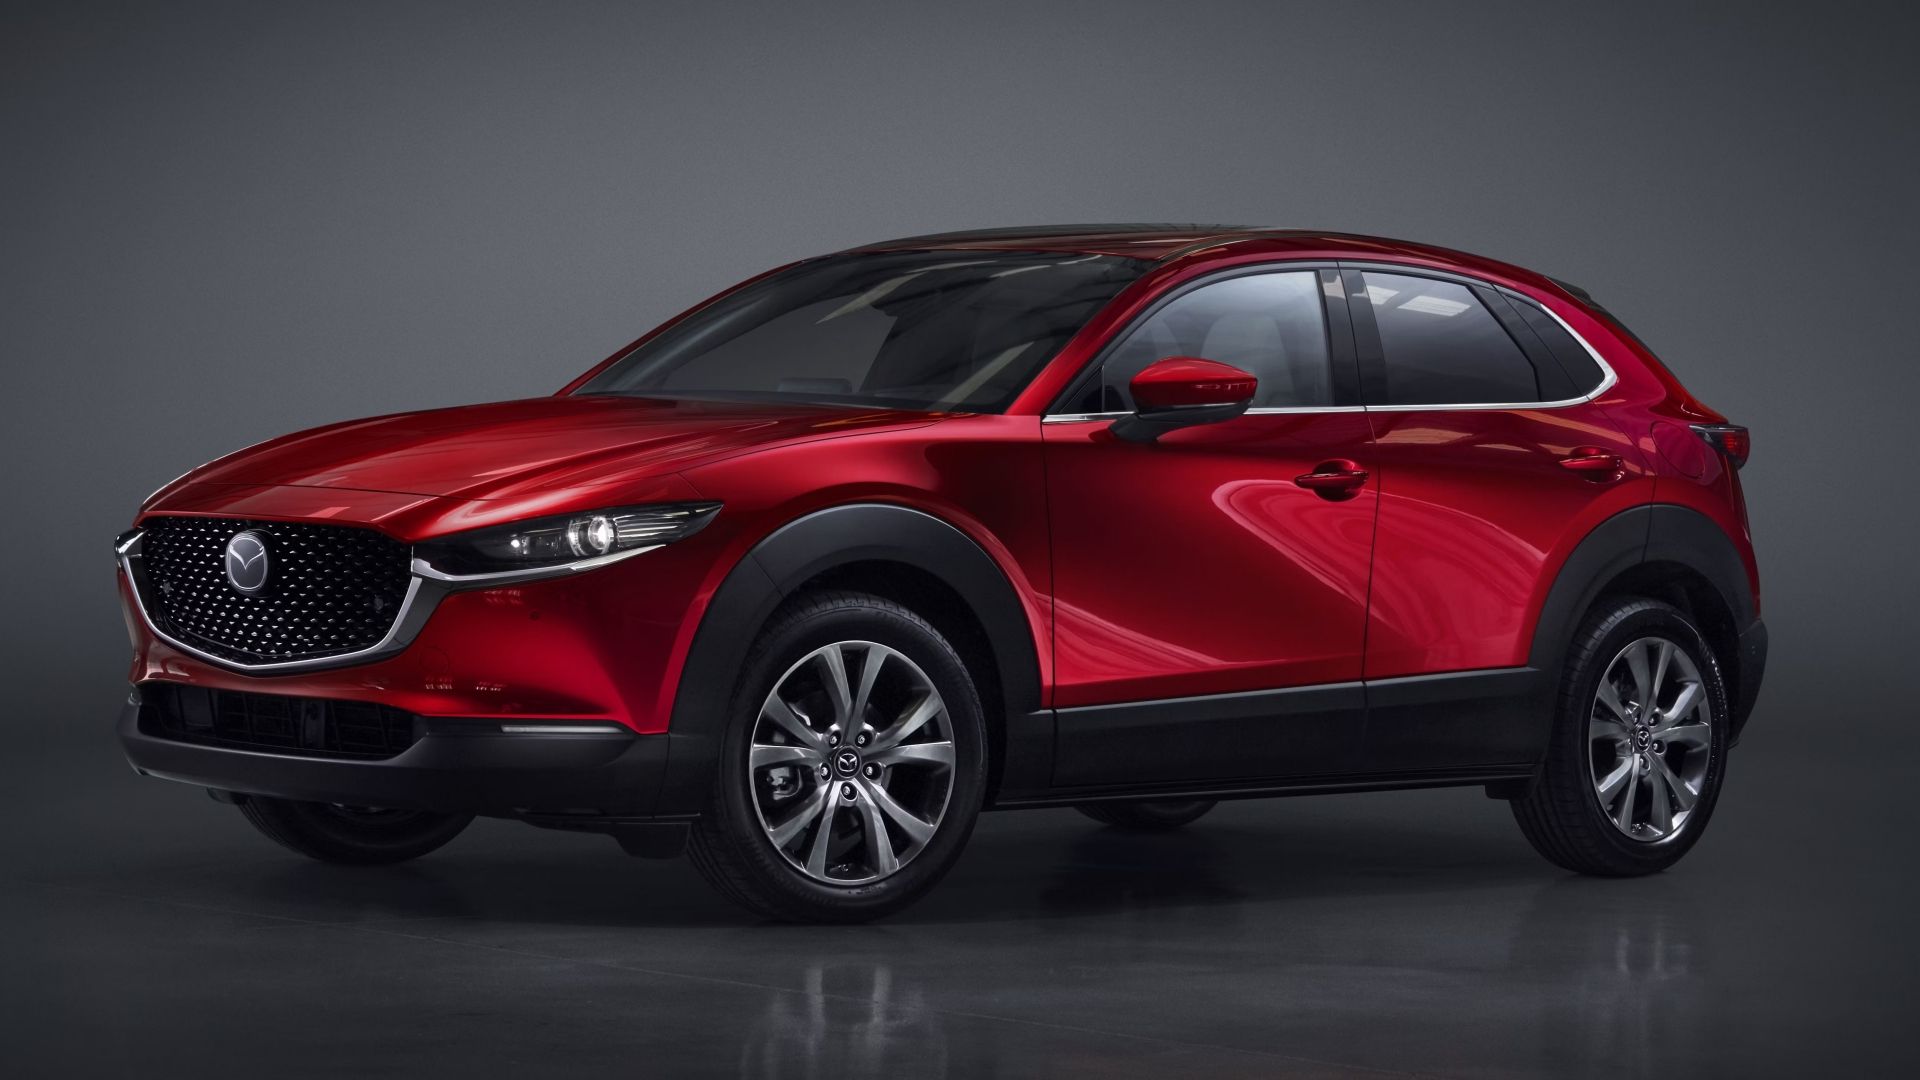 2023 Mazda CX-30 Price Review, Cost Of Ownership